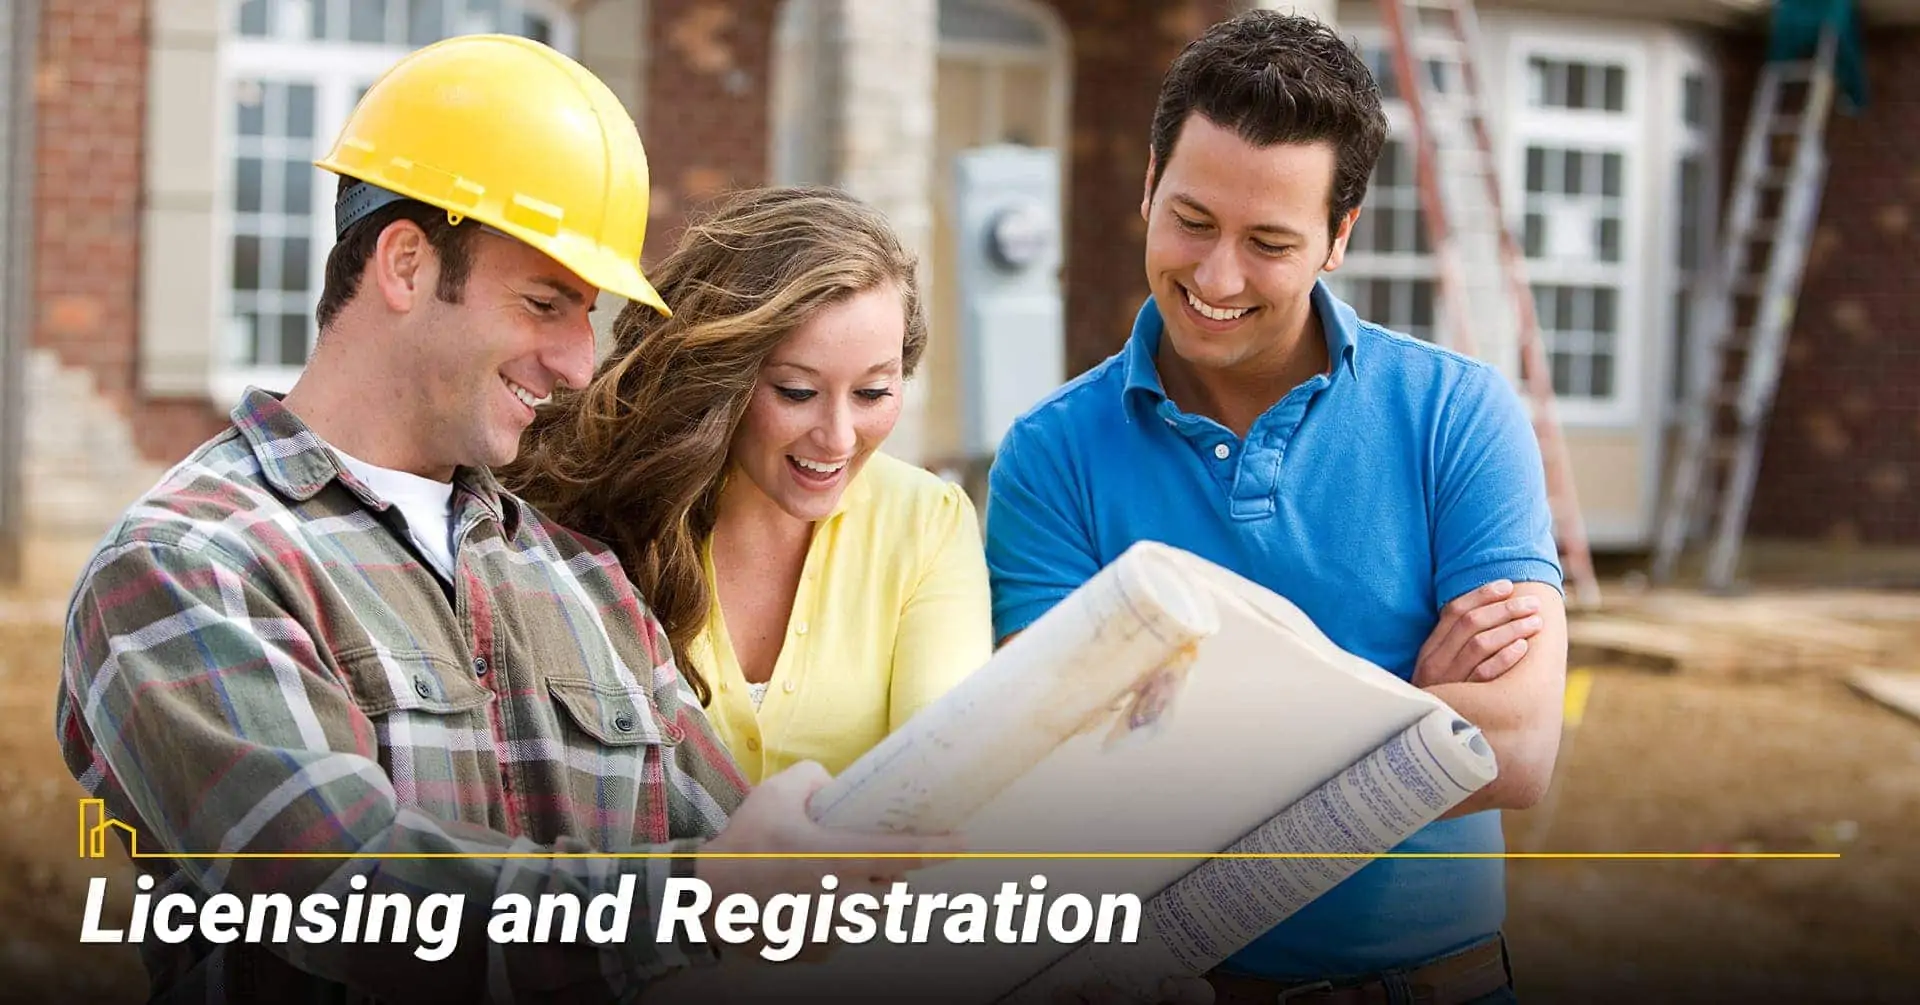 Licensing and Registration, licensed and registered contractors